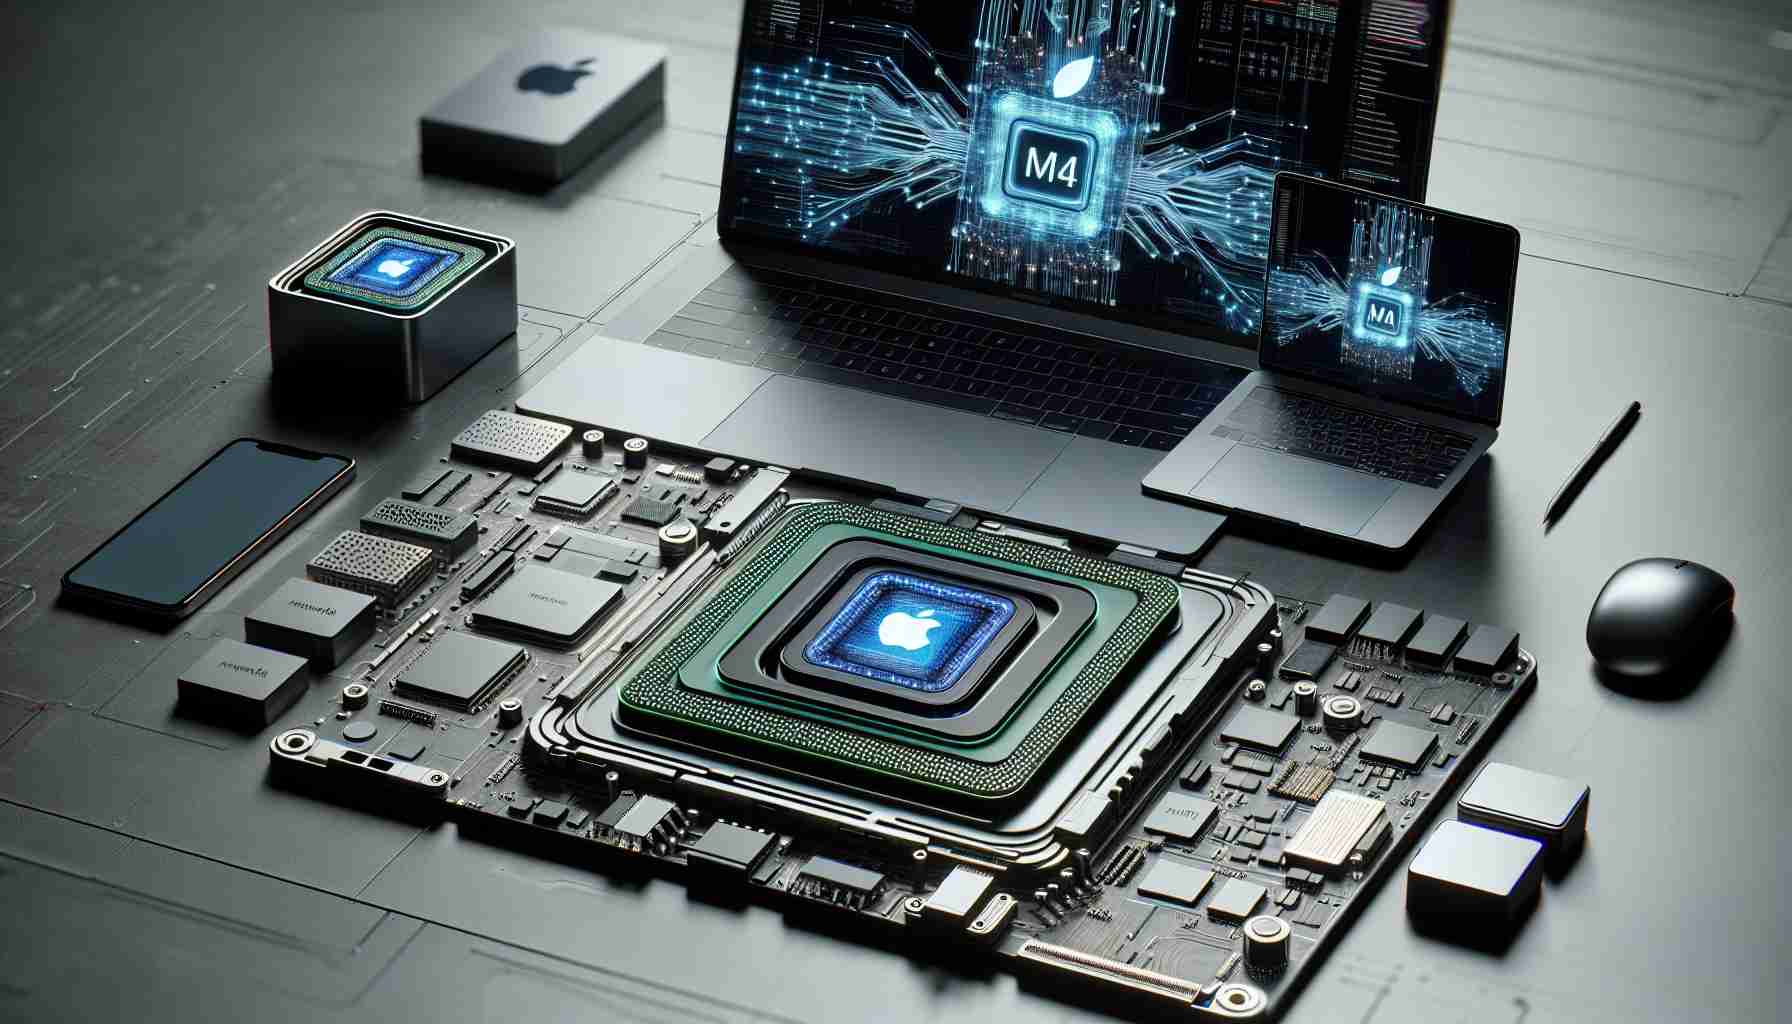 Apple Set to Innovate with AI-Enhanced M4 Chips Across Mac Lineup